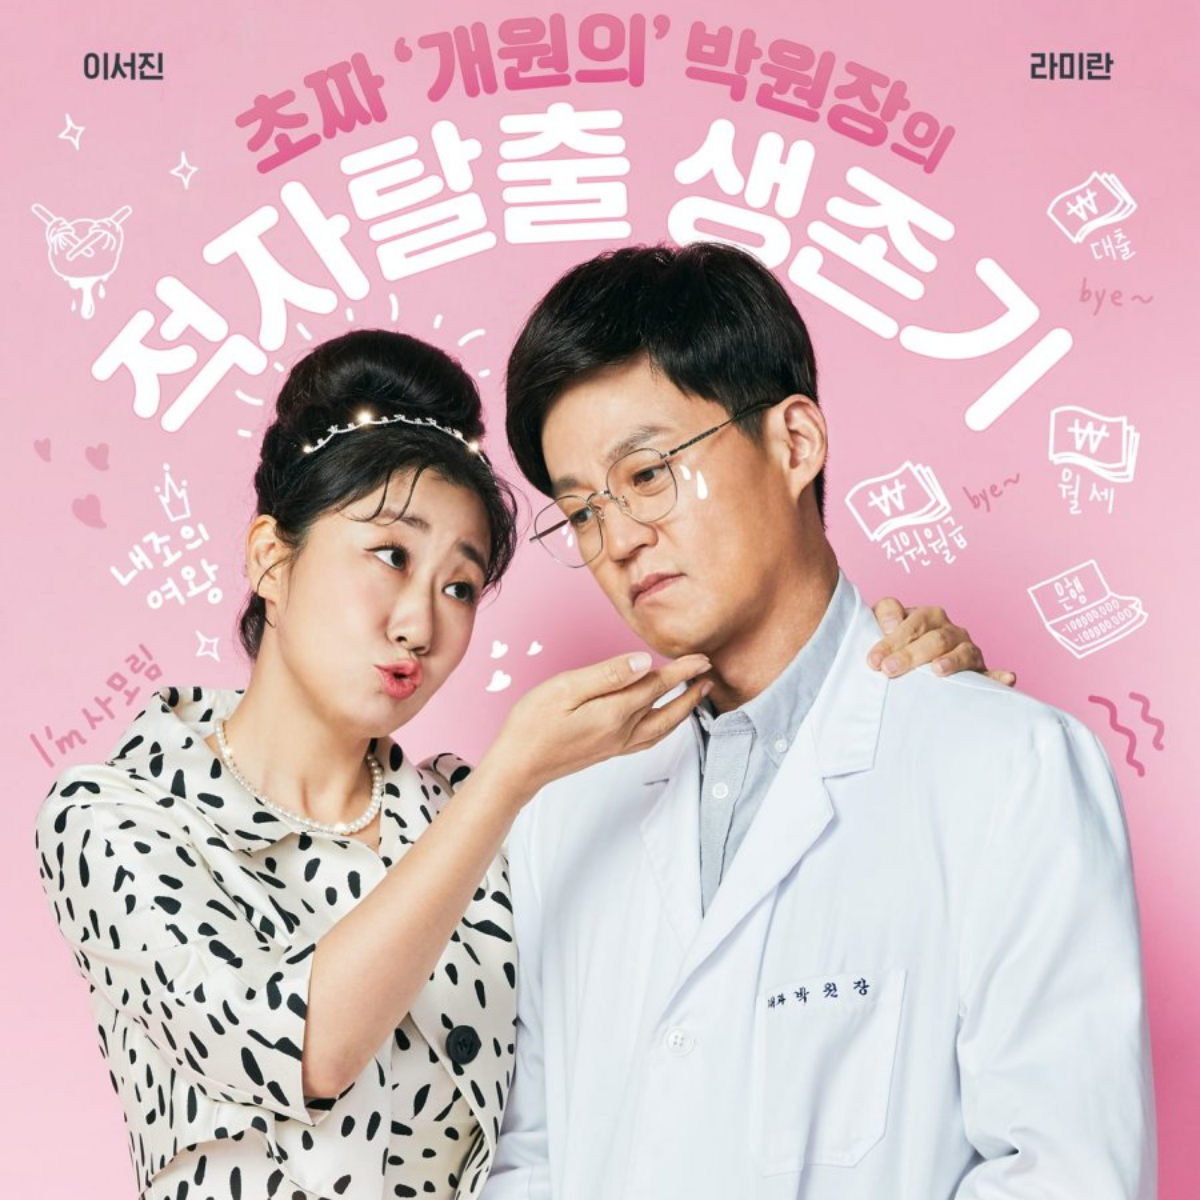 dr parks clinic kdrama 11